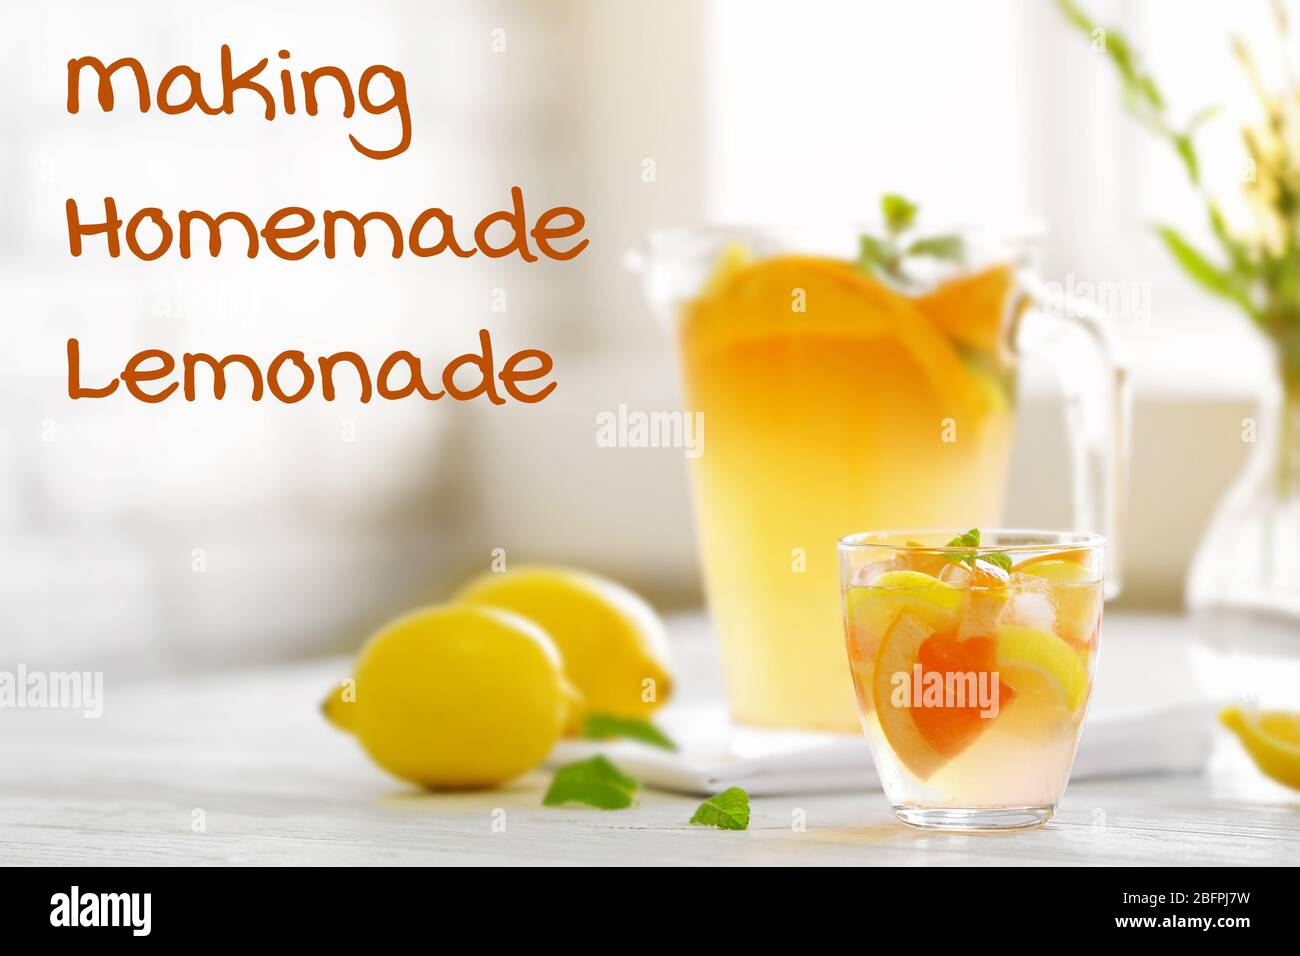 Glass of refreshing drink with lemon and grapefruit on table. Text MAKING HOMEMADE LEMONADE on background Stock Photo